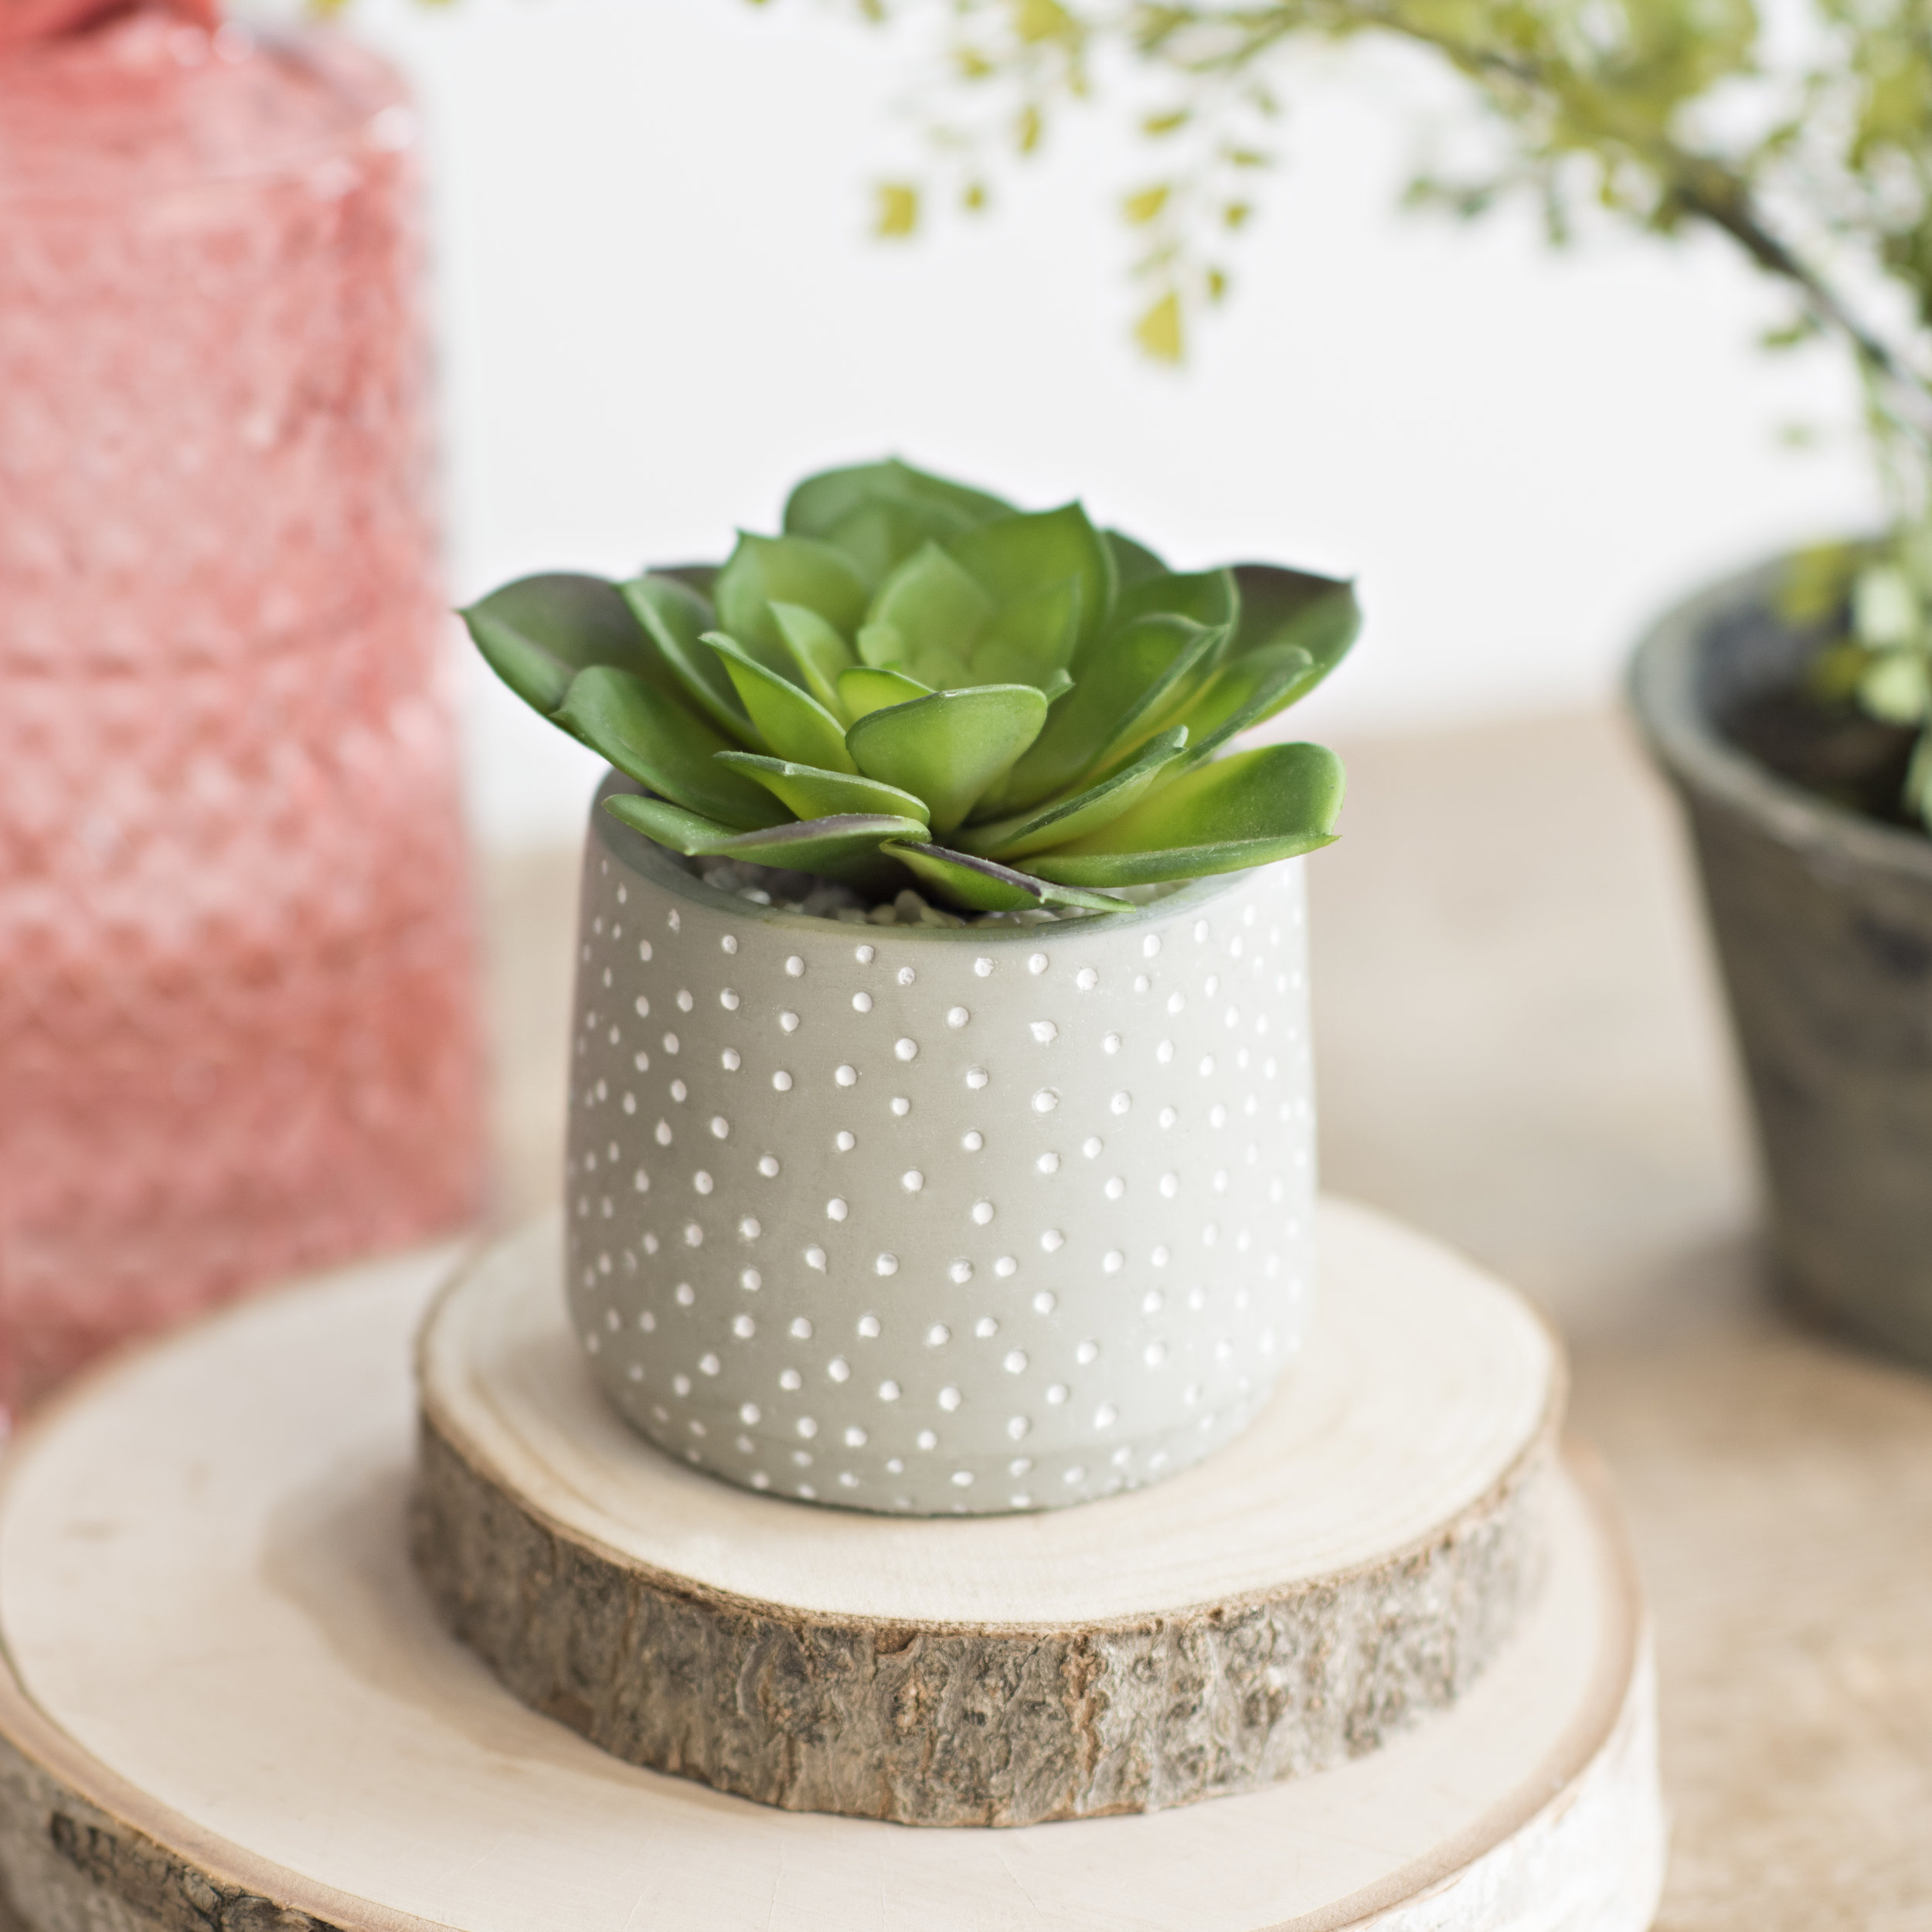 “I can’t get enough of these! The ceramic pots are so cute, and the succulents look soooooooo real! The best part, I don’t have to worry about watering them!”